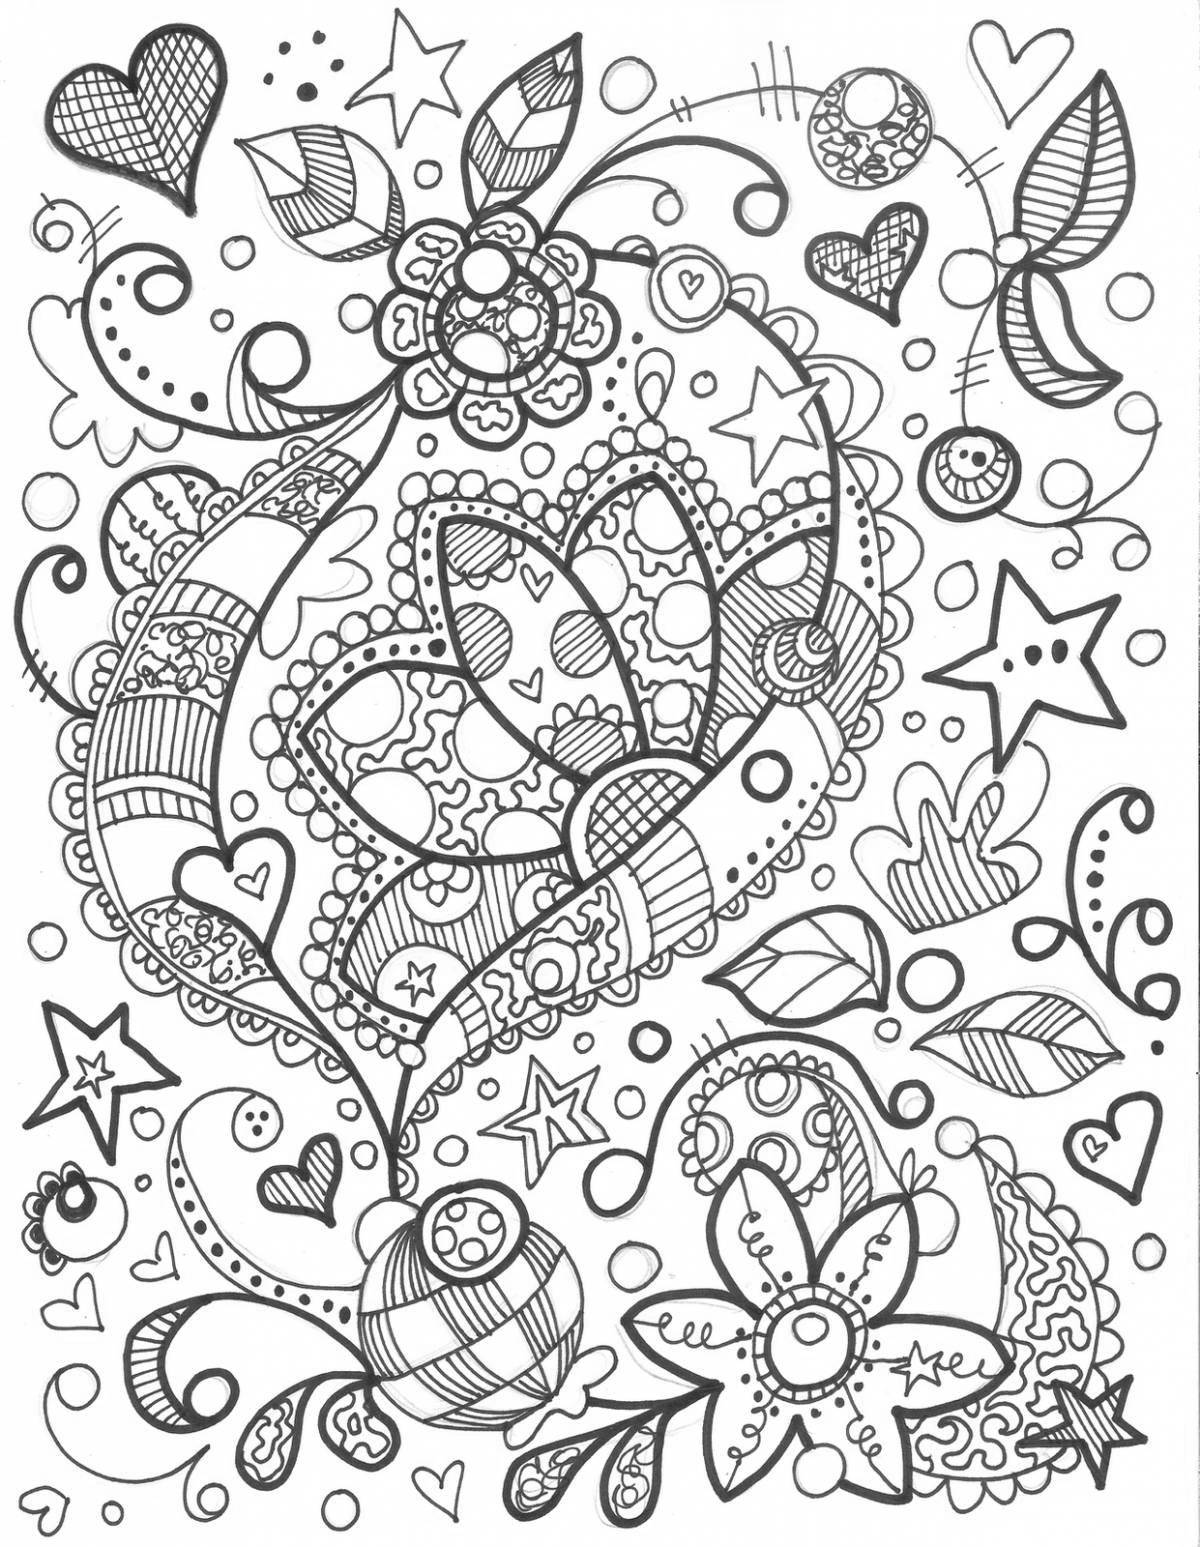 Invigorating anti-stress coloring book for markers